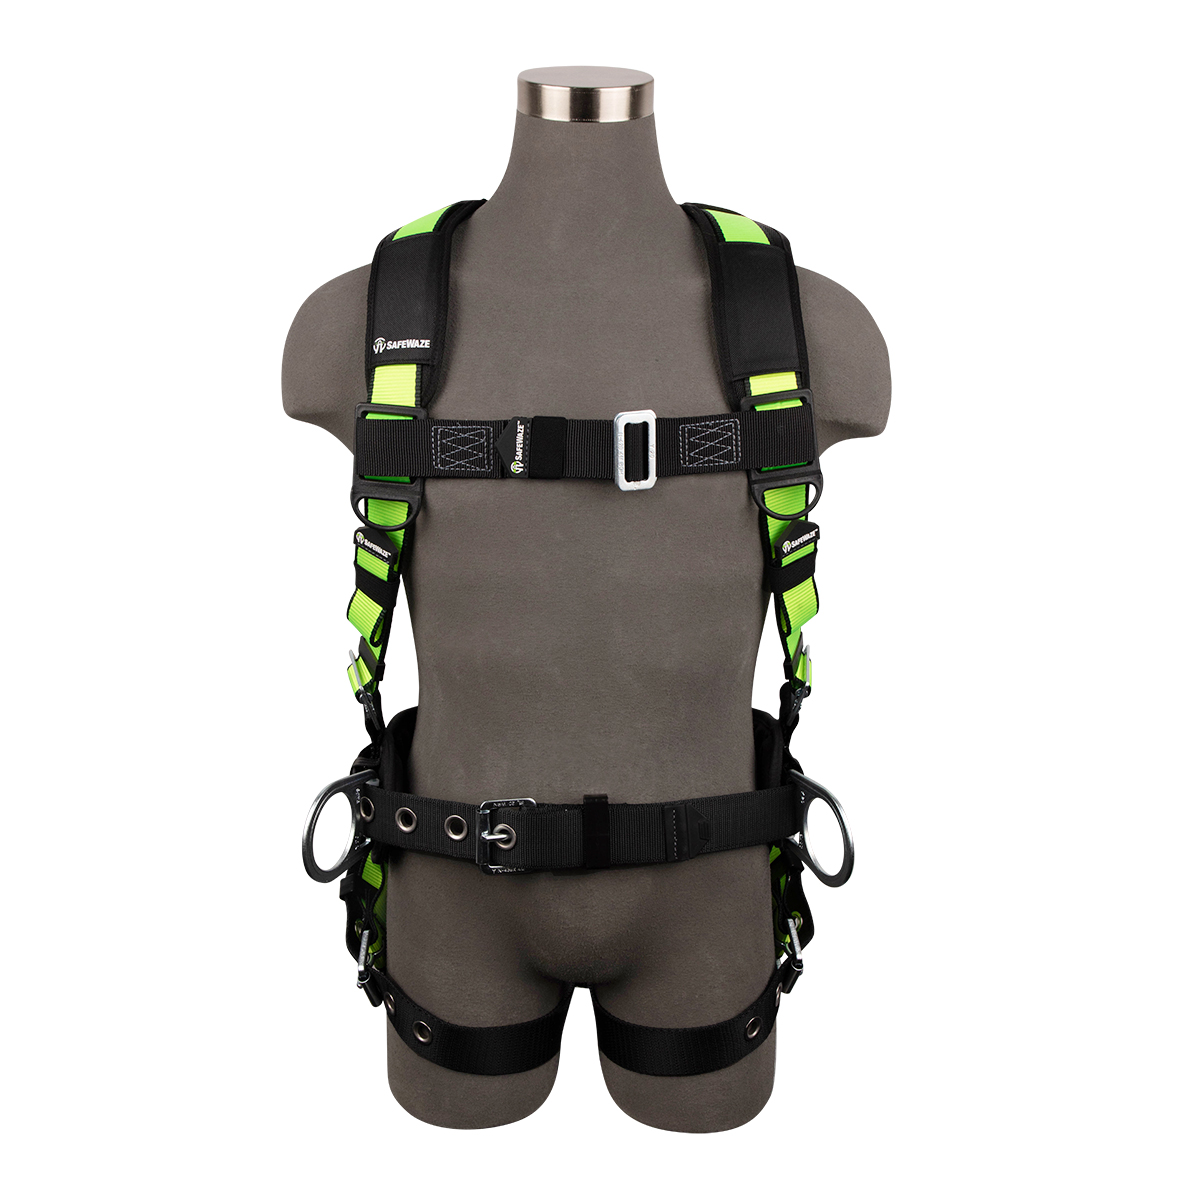 PRO Construction Harness - XL - Utility and Pocket Knives